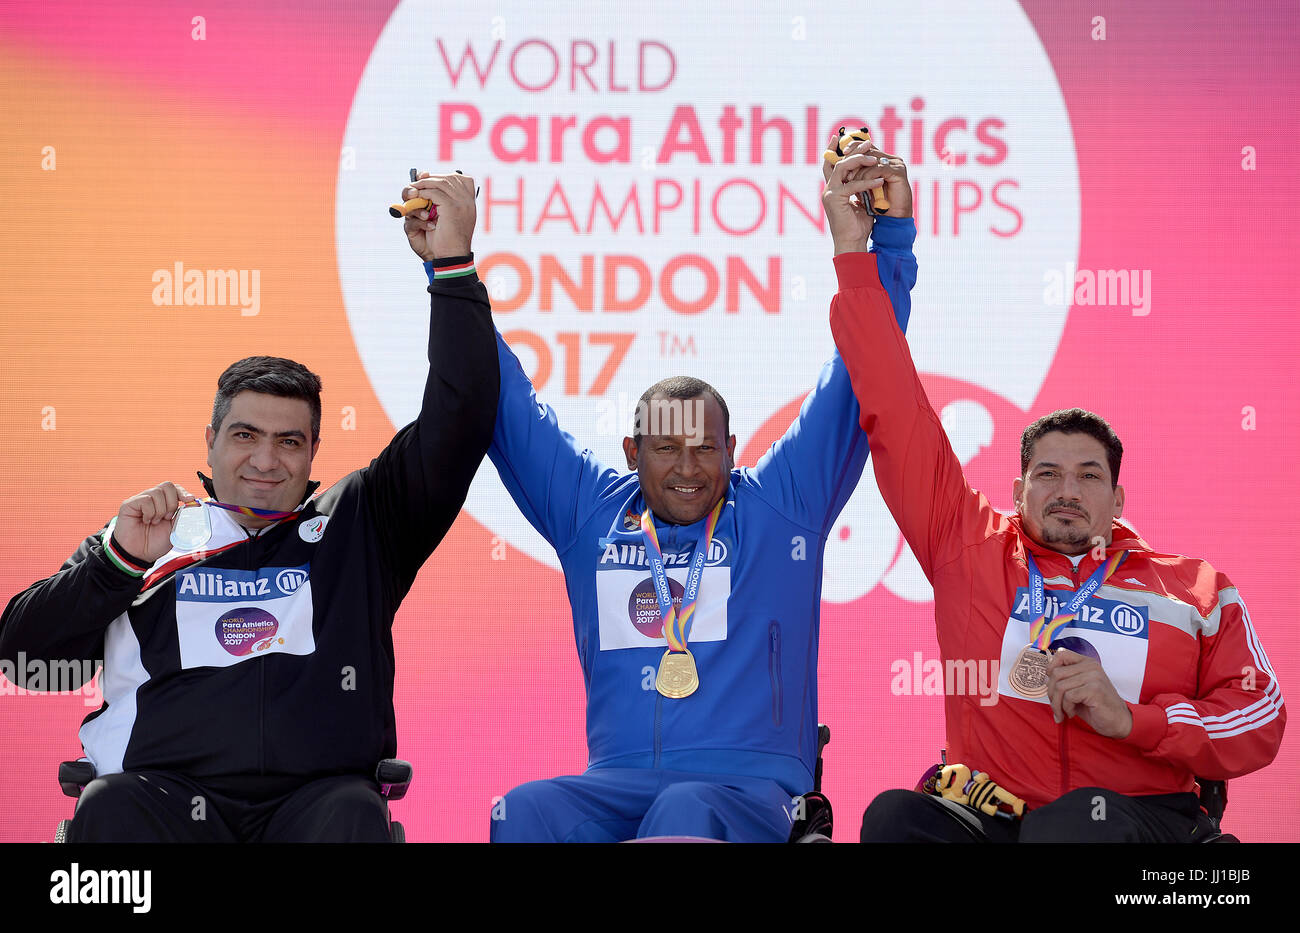 Islamic Republic of Iran's Ali Mohammadyari, Cuba's Leonardo Diaz and Egypt's Ibrahim Ibrahim after the  Men's Discus Throw F56 Final during day four of the 2017 World Para Athletics Championships at London Stadium. PRESS ASSOCIATION Photo. Picture date: Monday July 17, 2017. See PA story ATHLETICS Para. Photo credit should read: Victoria Jones/PA Wire. RESTRICTIONS: Editorial use only. No transmission of sound or moving images and no video simulation. Stock Photo